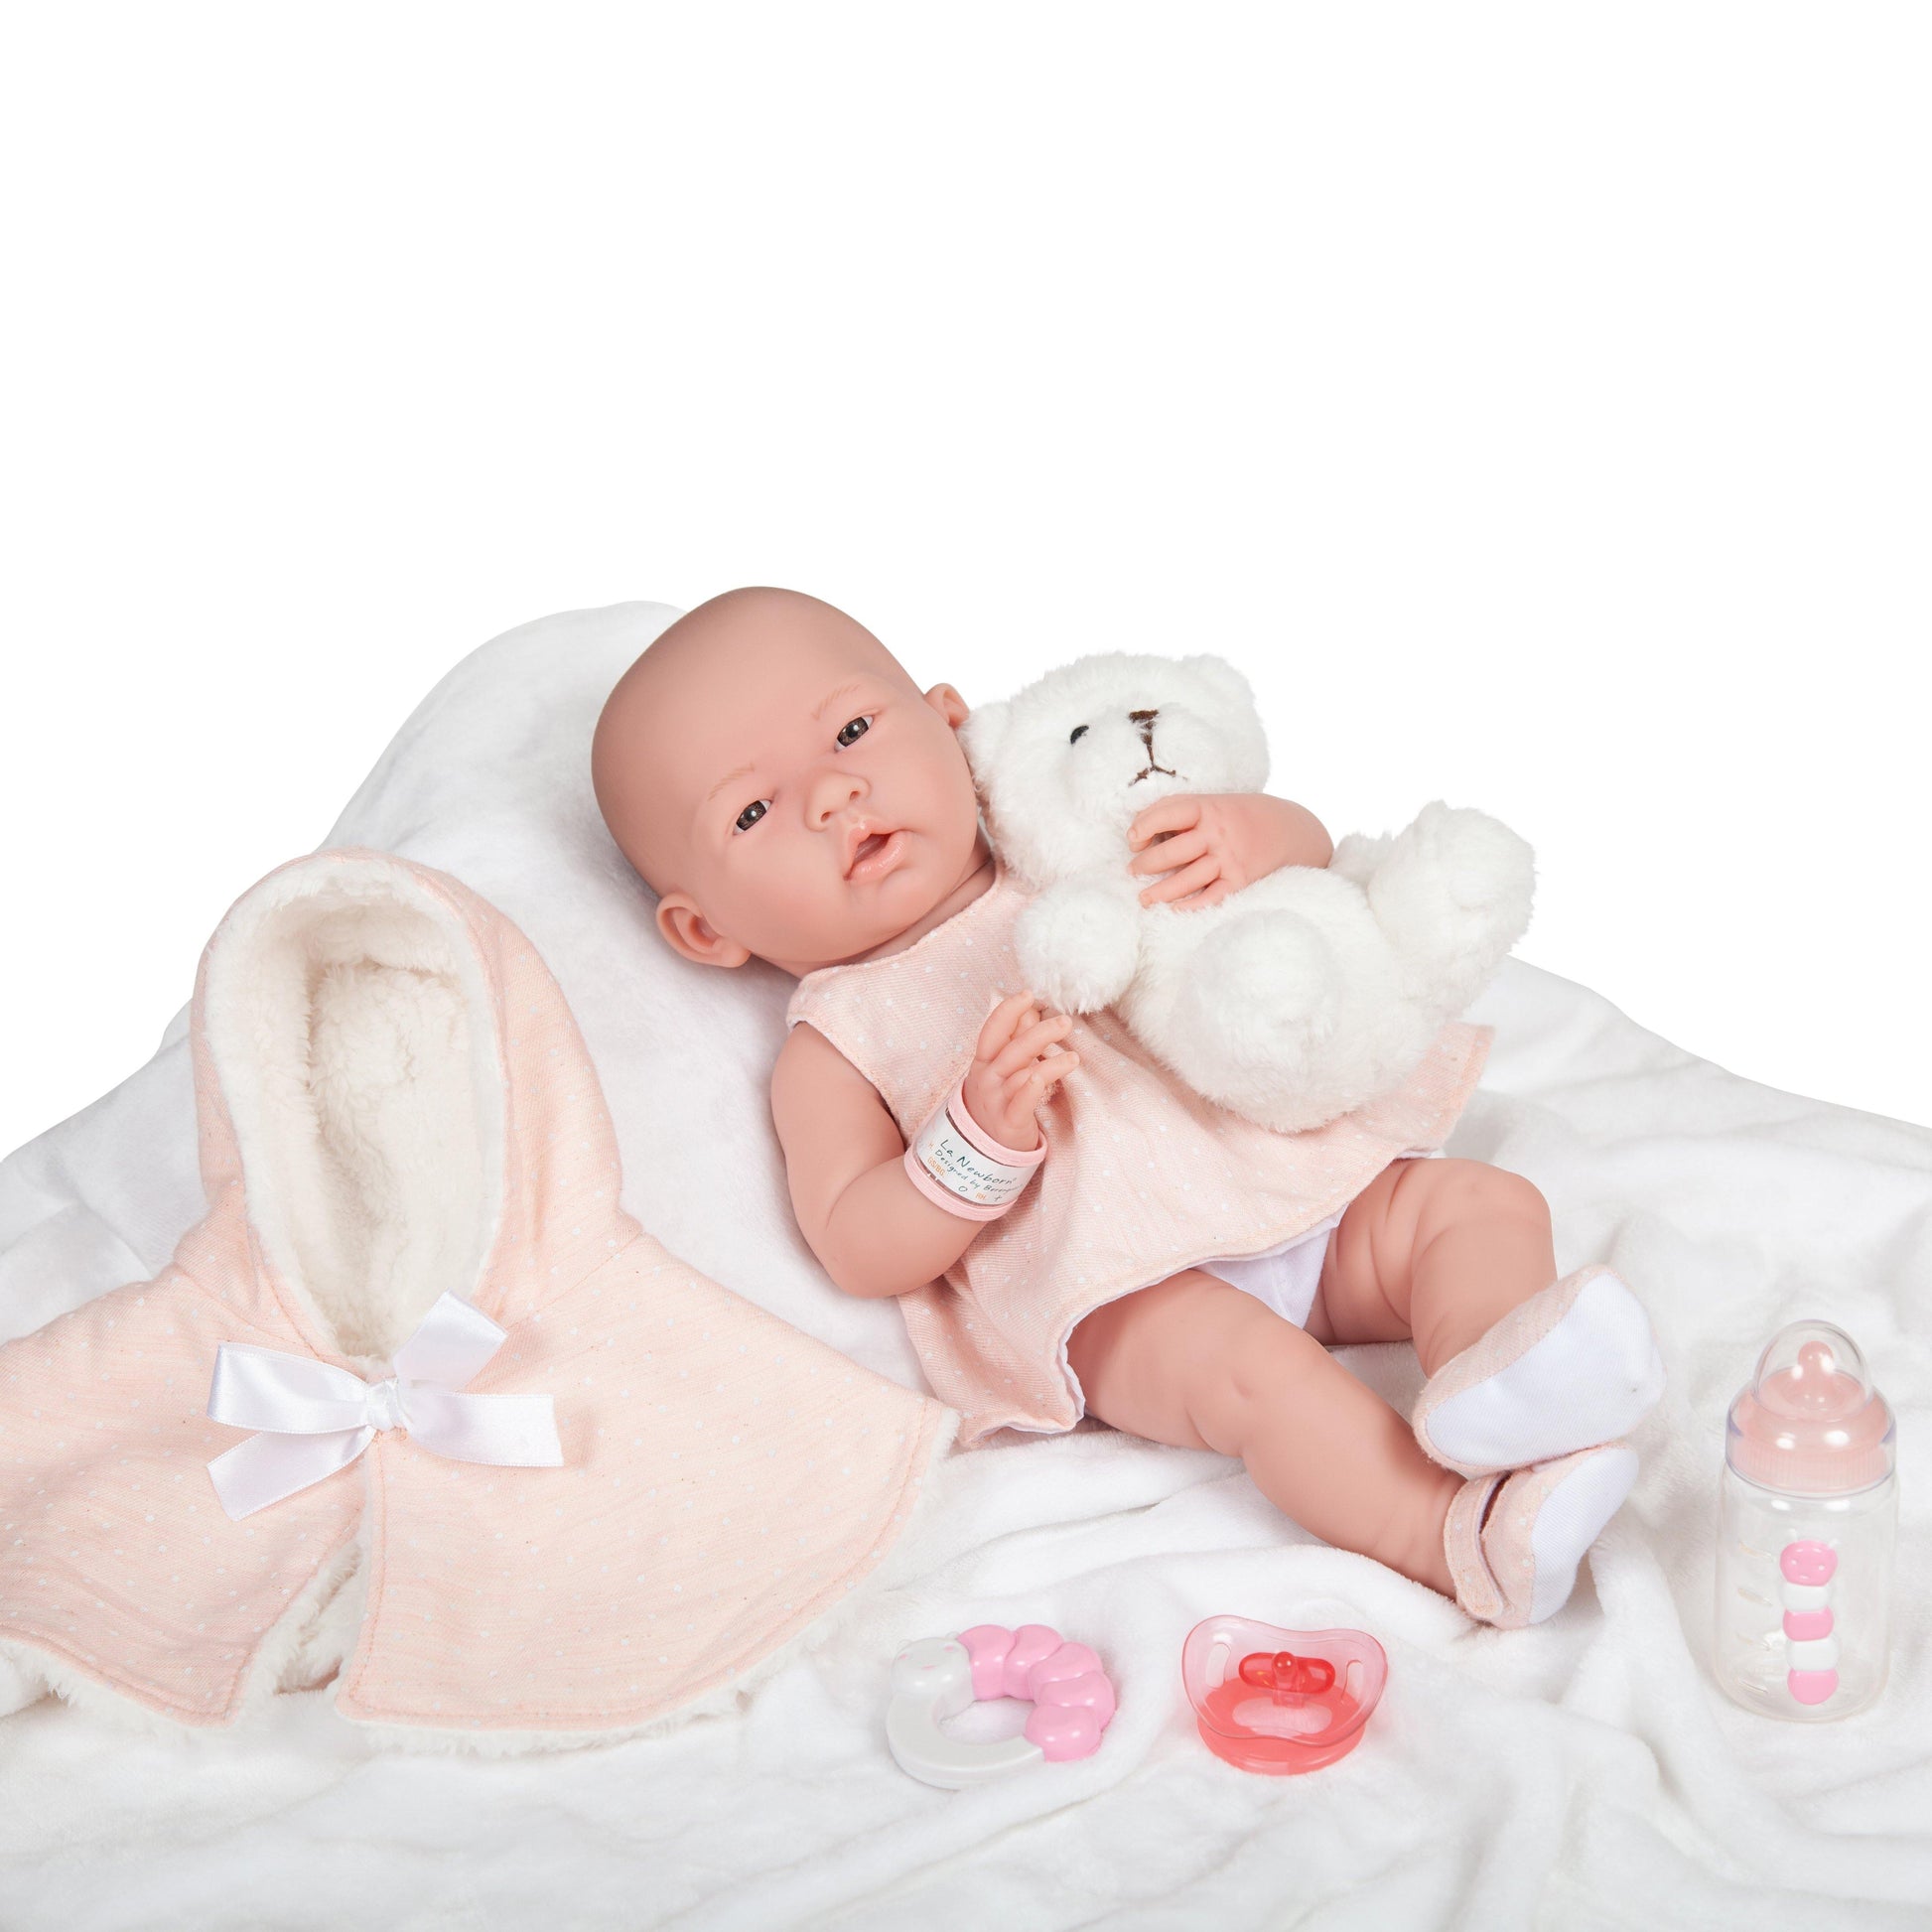 JC Toys, La Newborn All-Vinyl Real Girl 15 inches Baby Doll Pink Coat Deluxe Set - JC Toys Group Inc.